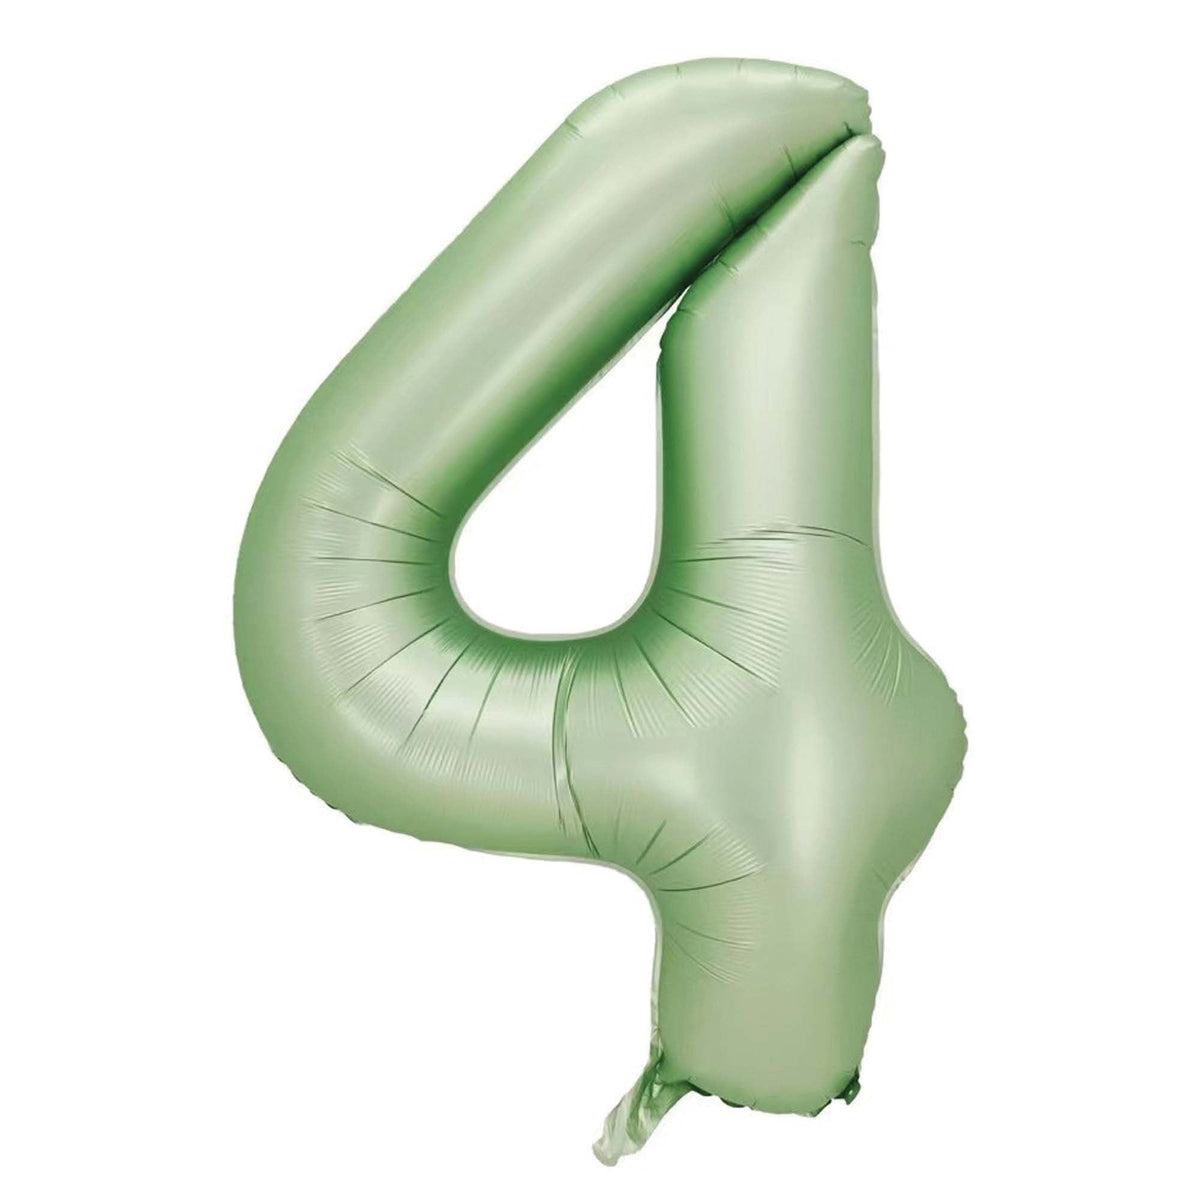 BOOMBA INTERNATIONAL TRADING CO,. LTD Balloons Eucalyptus Matte Green Number 4 Supershape Foil Balloon, 40 Inches, 1 Count 810077659885